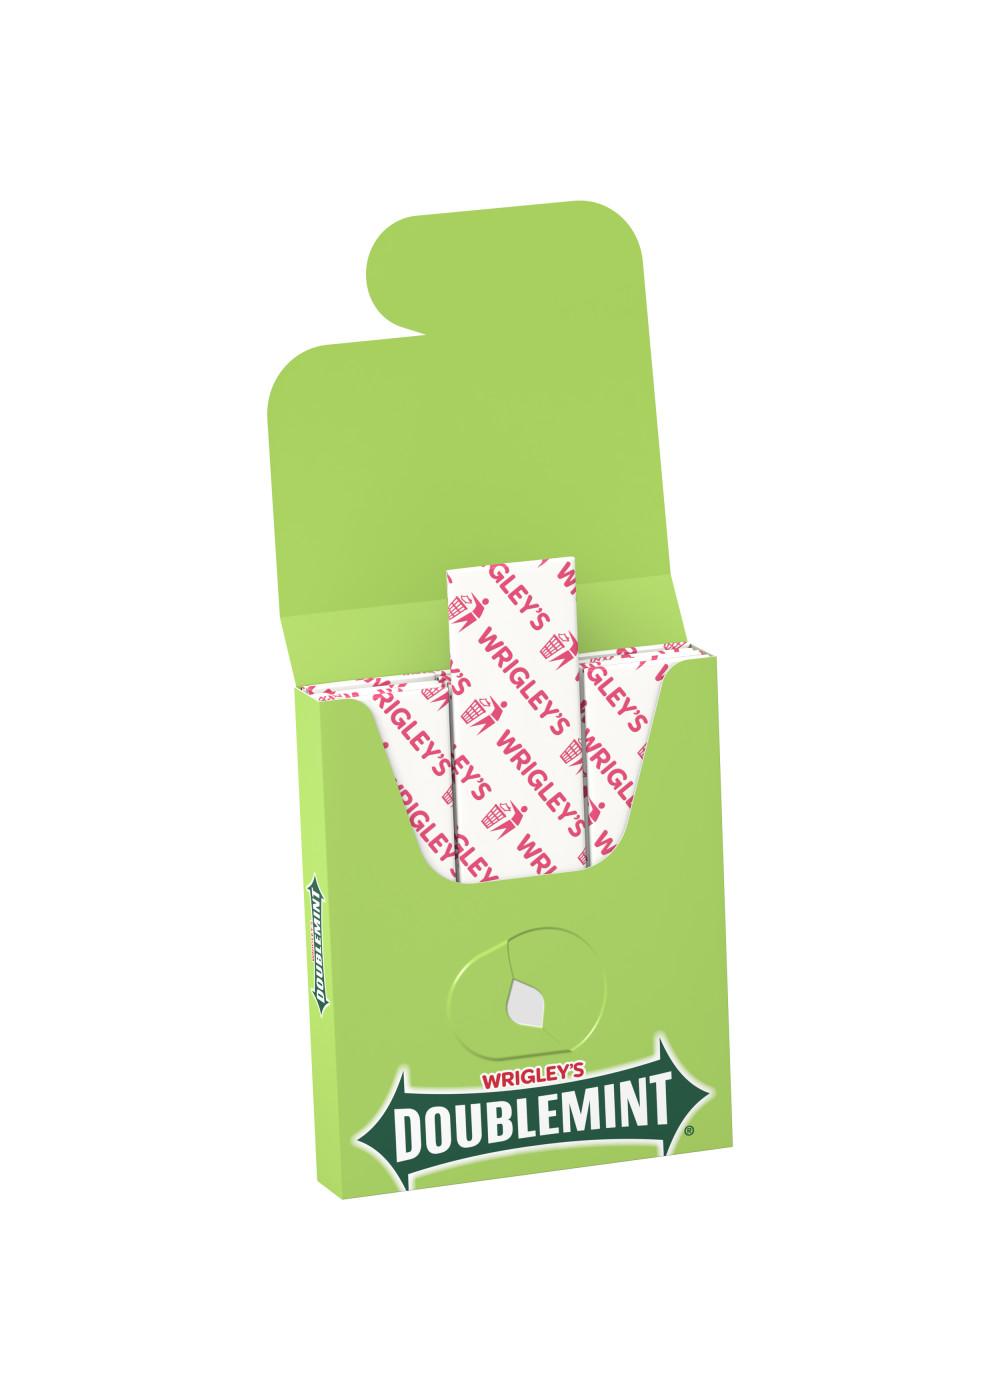 Wrigley's Doublemint Chewing Gum Value Pack, 3 Pk; image 6 of 7